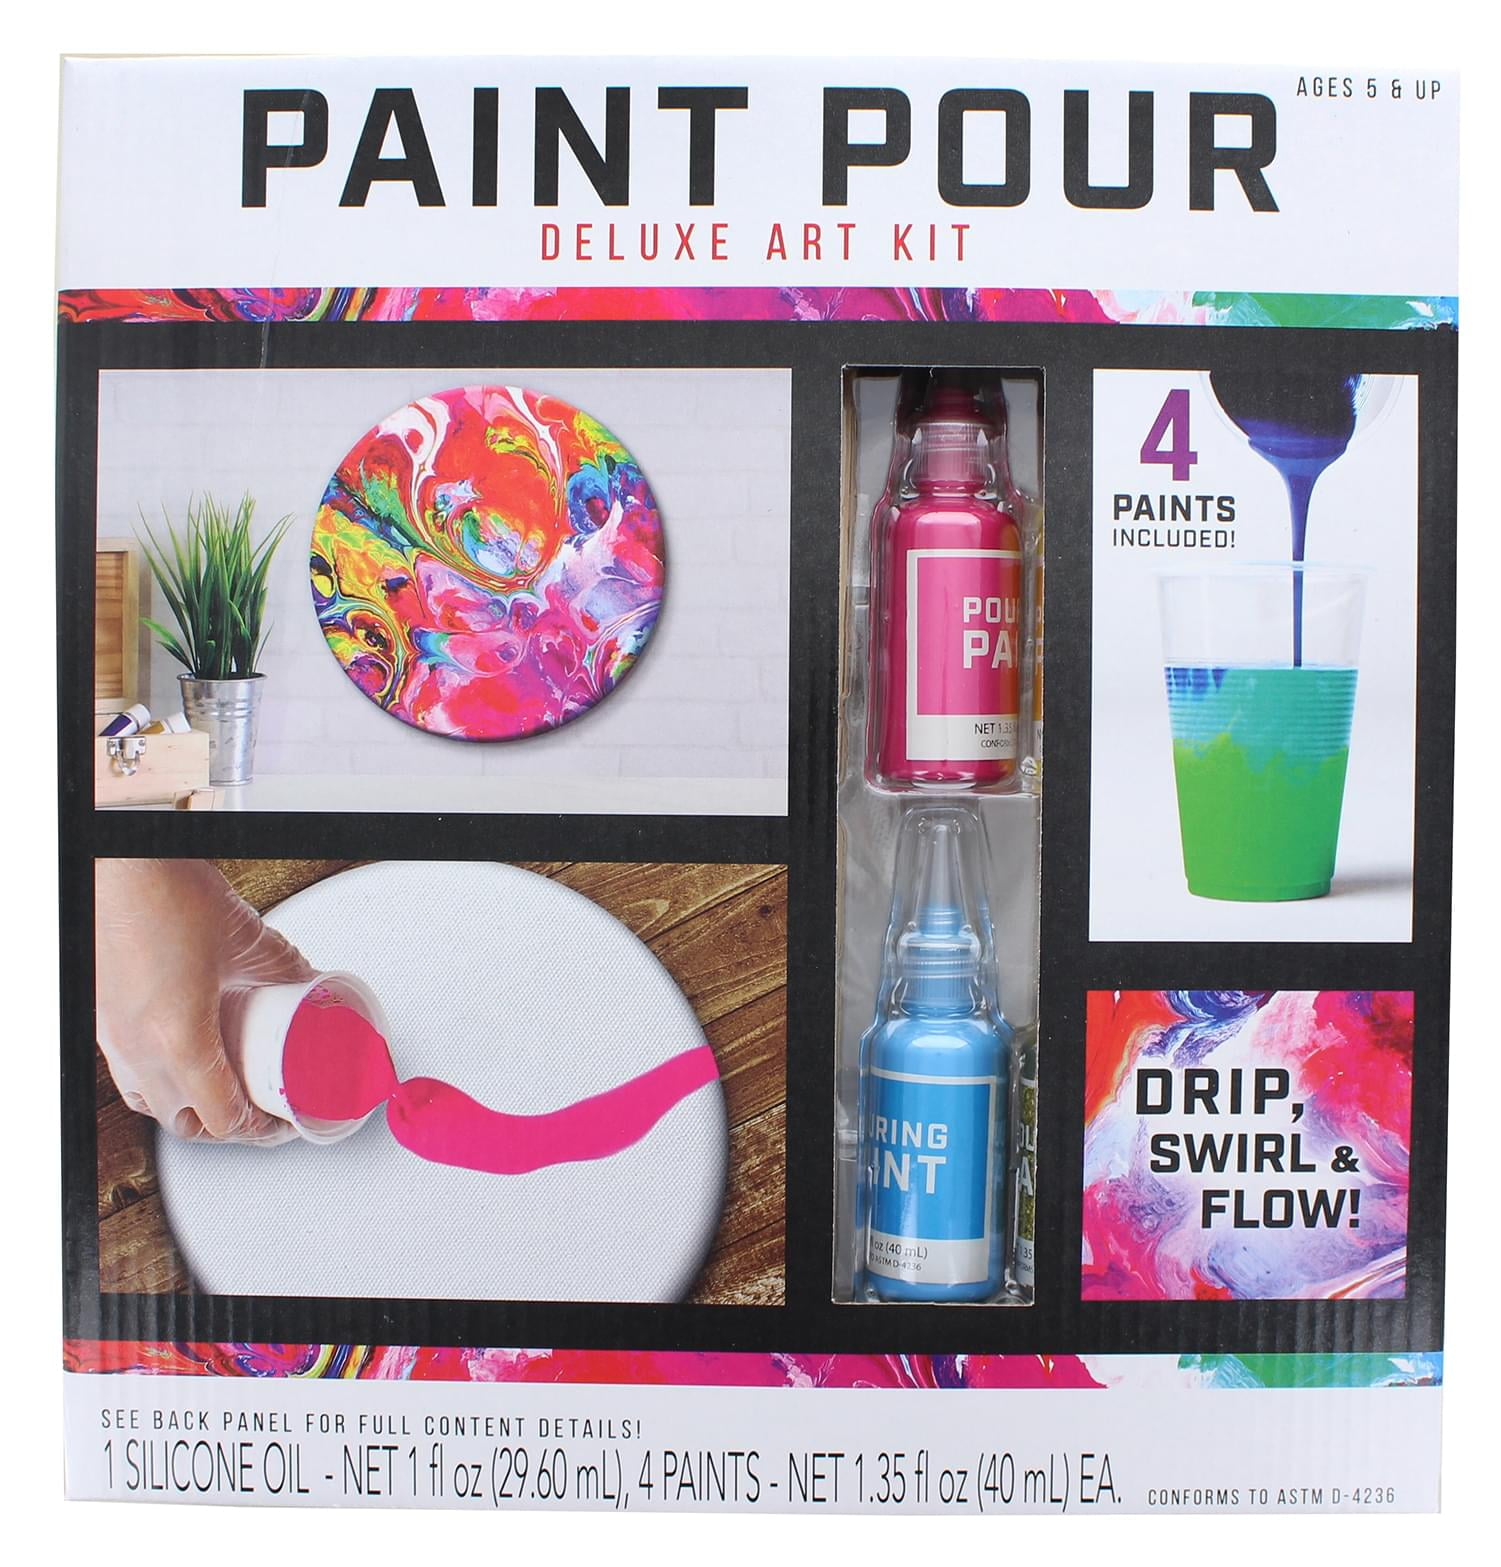 Fabric Paint, Shuttle Art 18 Colors Permanent Soft Fabric Paint in Bottles  (60ml/2oz) with Brushes, Palette, Stencils, Non-Toxic Textile Paint for